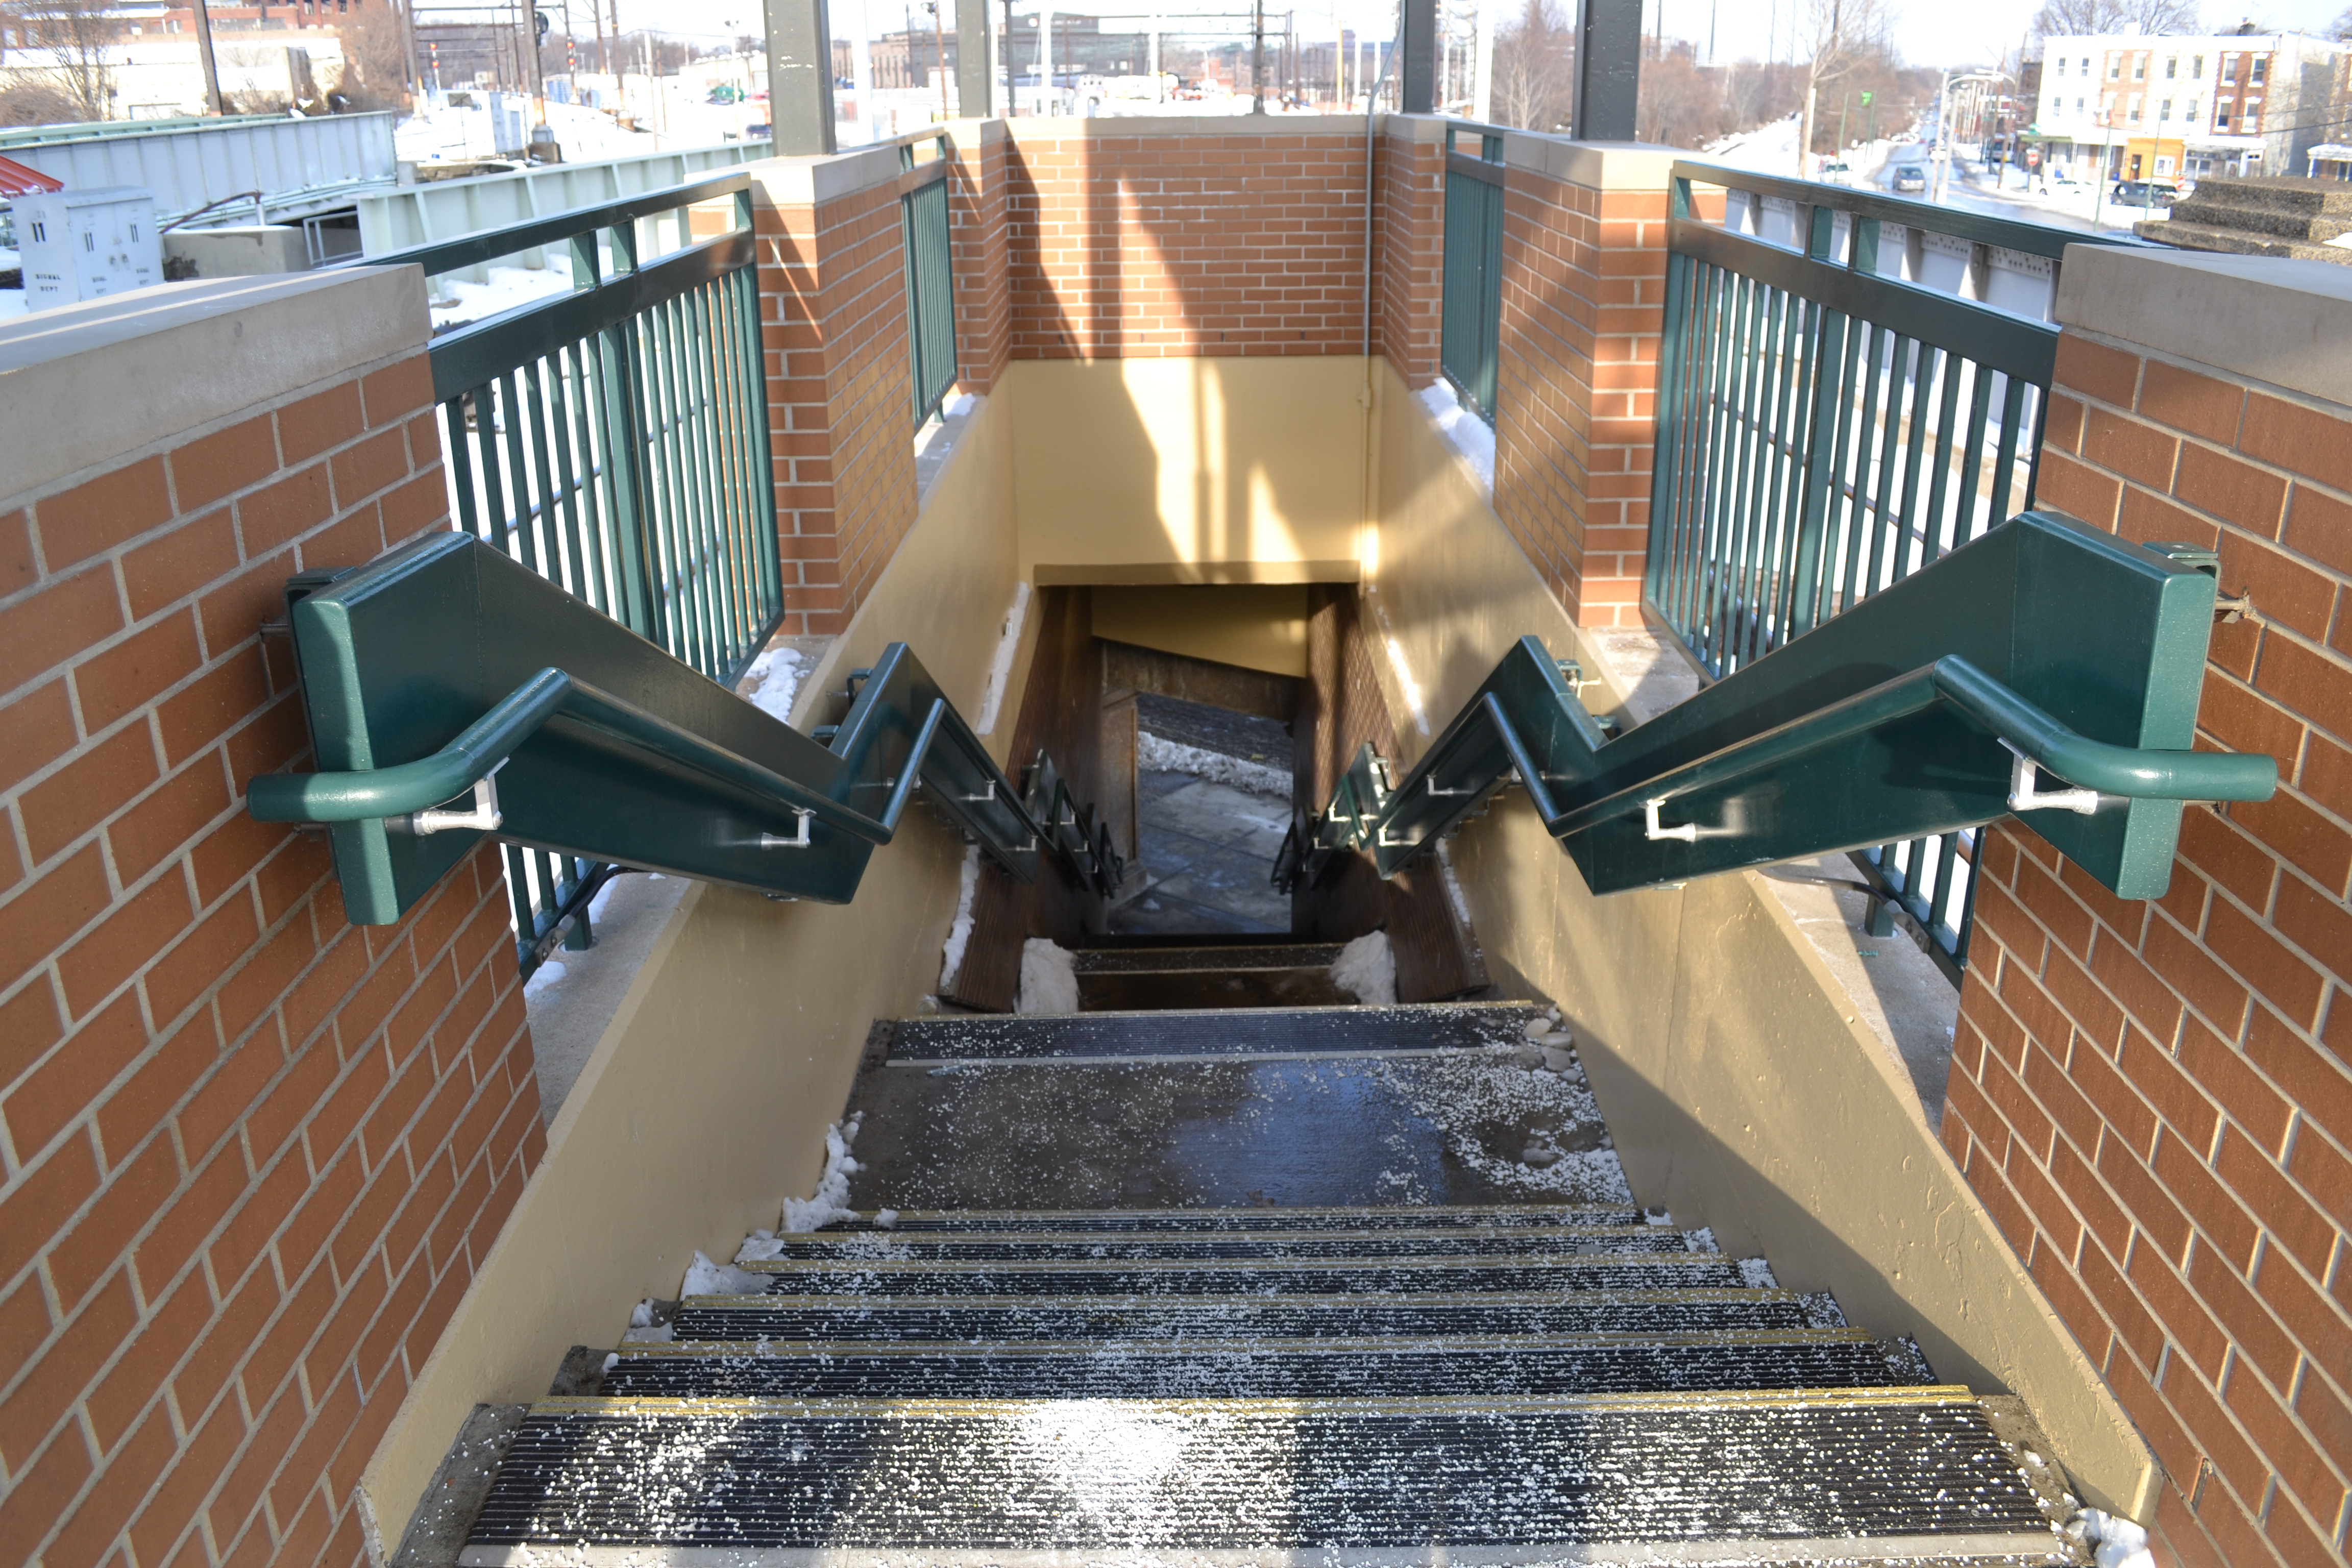 The stairs to the outbound platform have been revamped